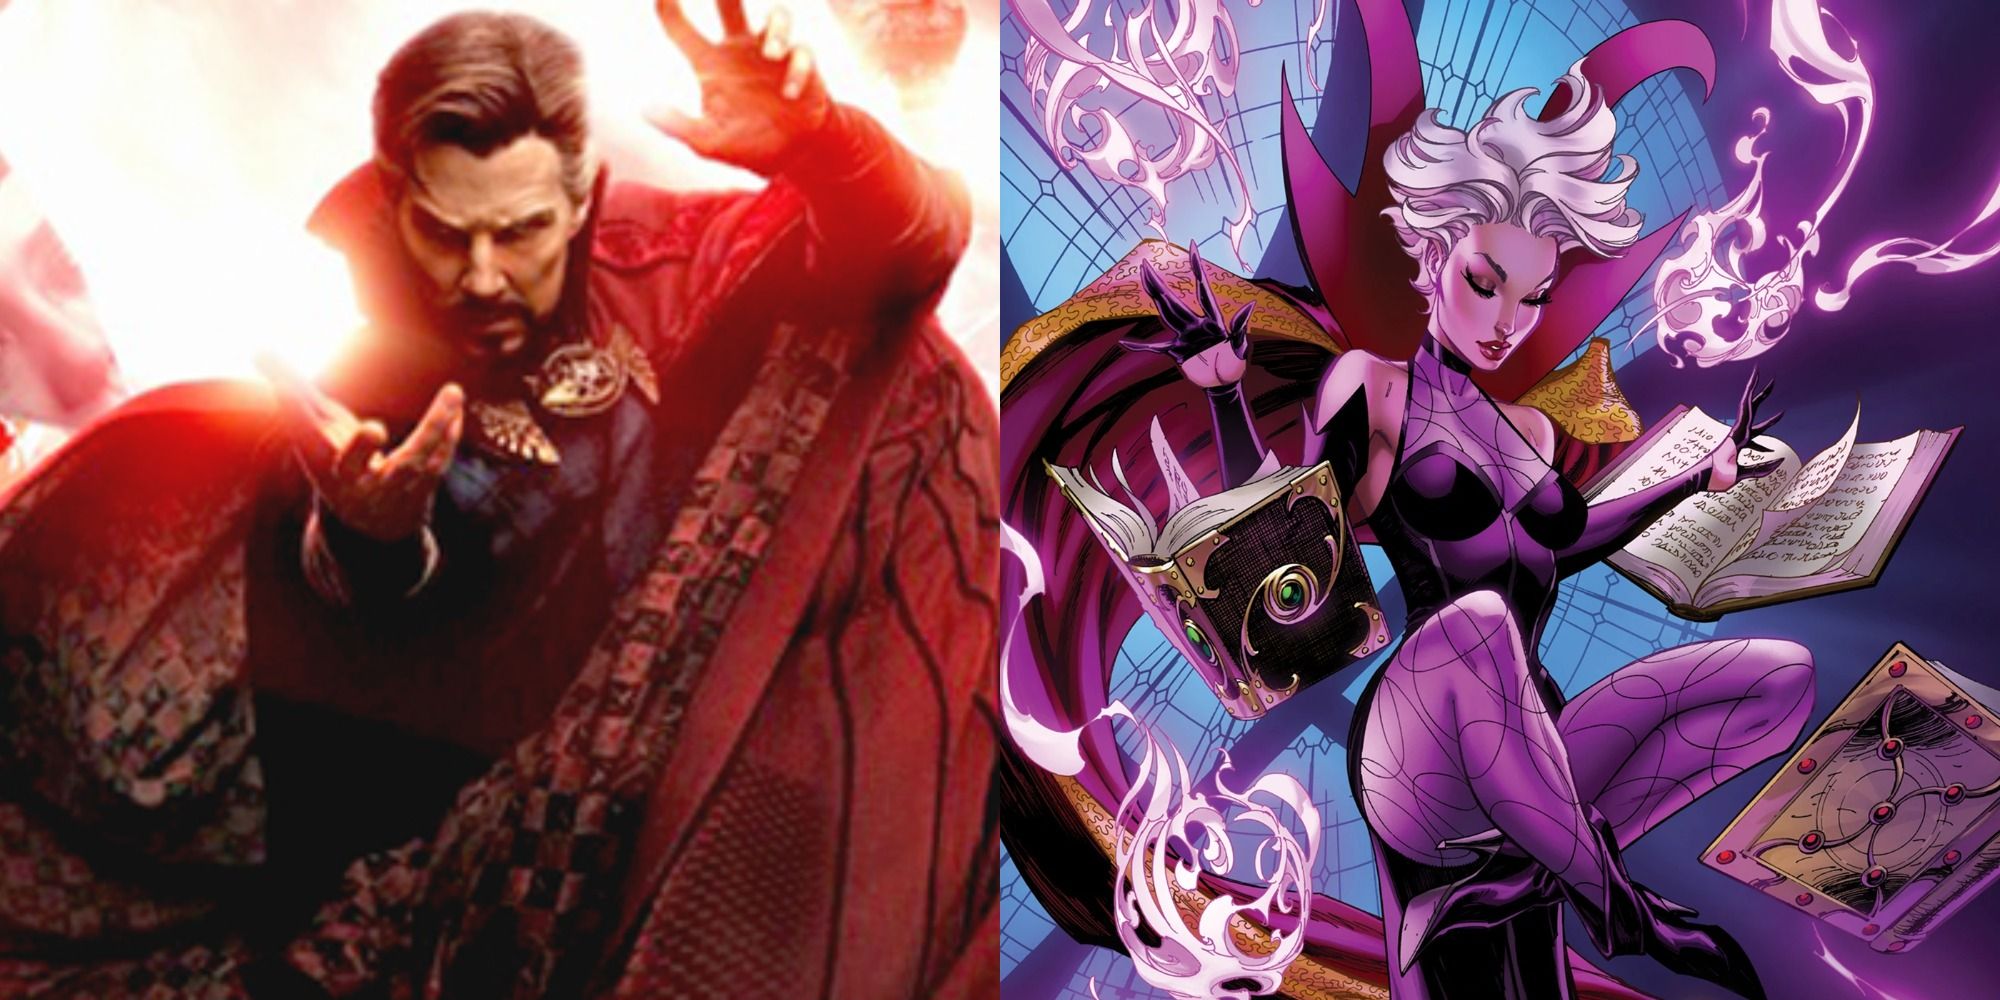 Split image of Doctor Strange in the Multiverse of Madness and Clea from Marvel Comics.